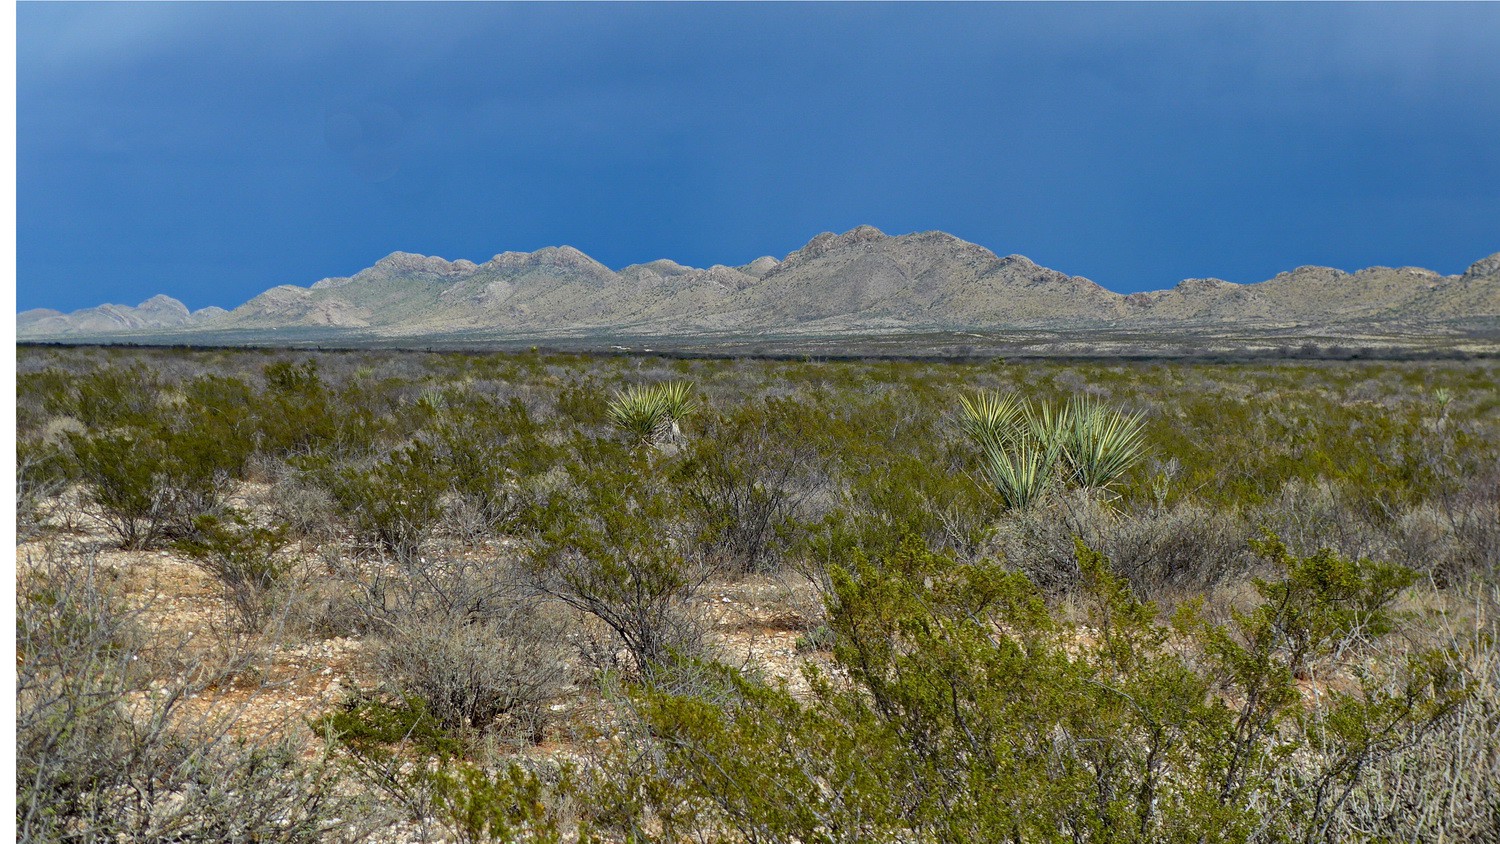 Mountains of the Big Bend National Park seen from our campsite few kilometers east of its eastern entrance